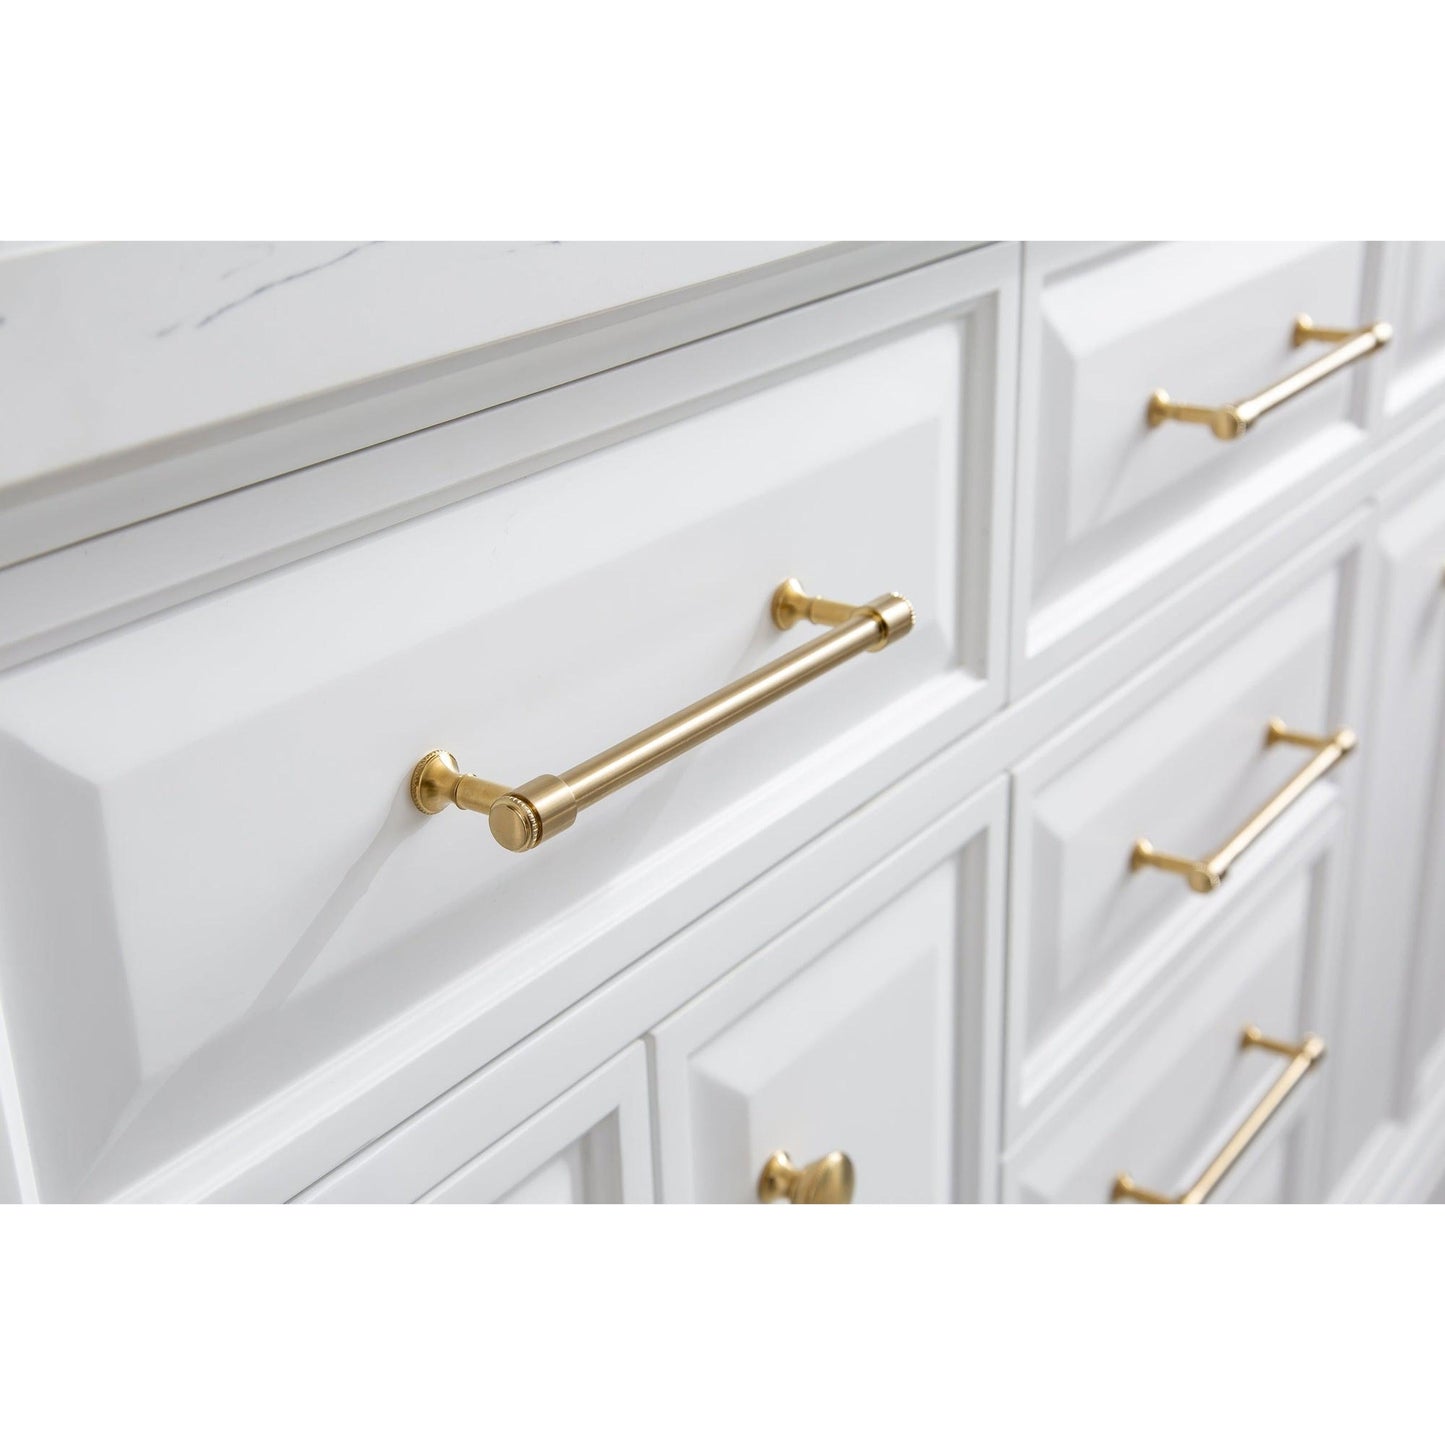 Water Creation Palace 60" Quartz Carrara Pure White Bathroom Vanity Set With Hardware And F2-0013 Faucets in Satin Gold Finish And Only Mirrors in Chrome Finish